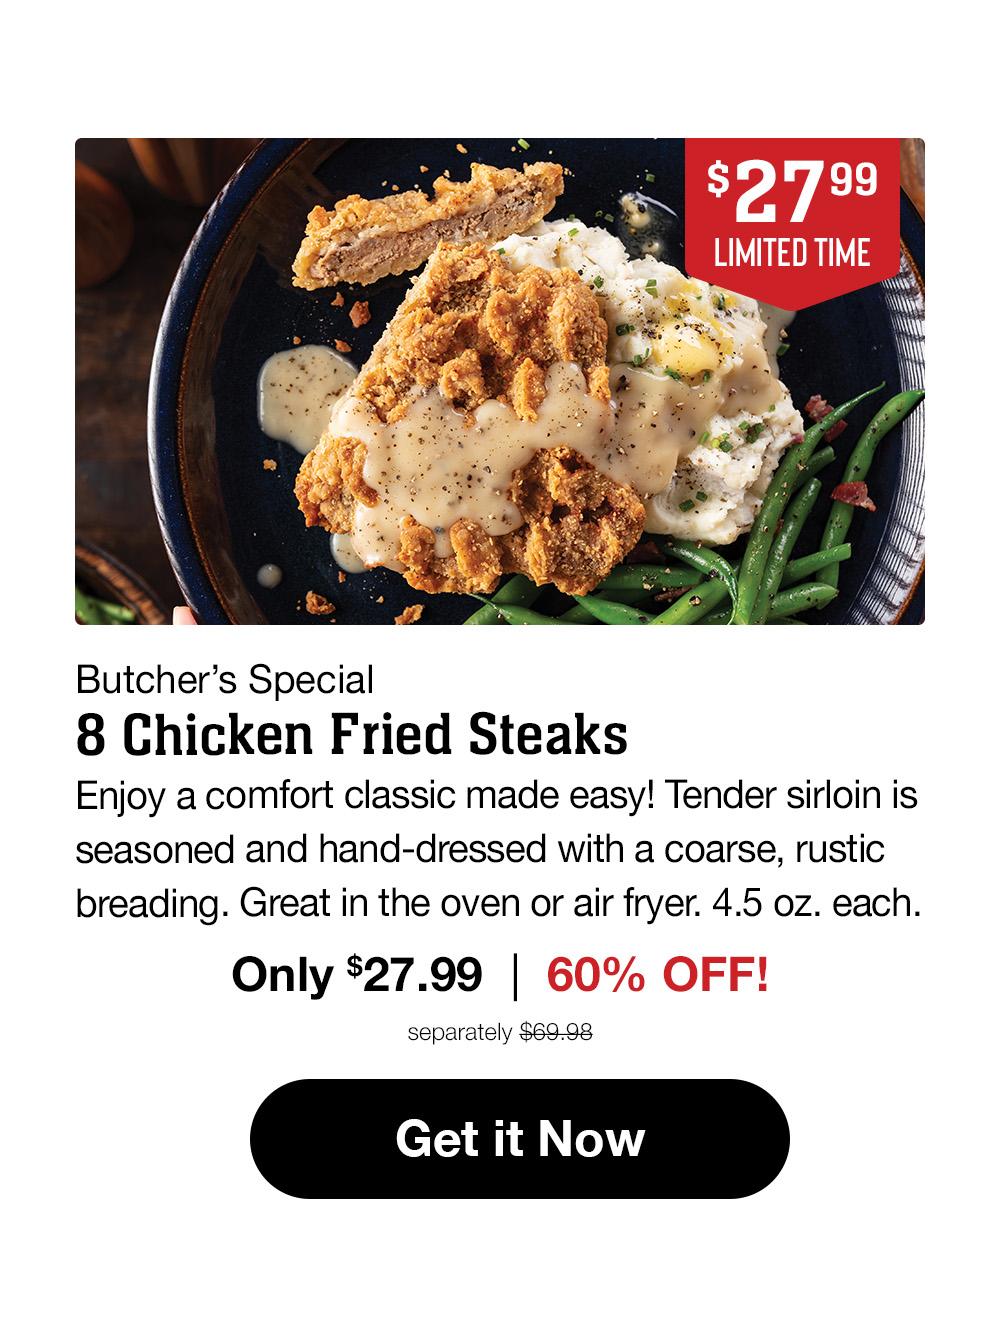 $27.99 LIMITED TIME | Butcher's Special | 8 Chicken Fried Steaks | Enjoy a comfort classic made easy! Tender sirloin is seasoned and hand-dressed with a coarse, rustic coating. Great in the oven or air-fryer. 4.5 oz. each. | Only $27.99 | 60% OFF! separately $69.98 || Get it Now